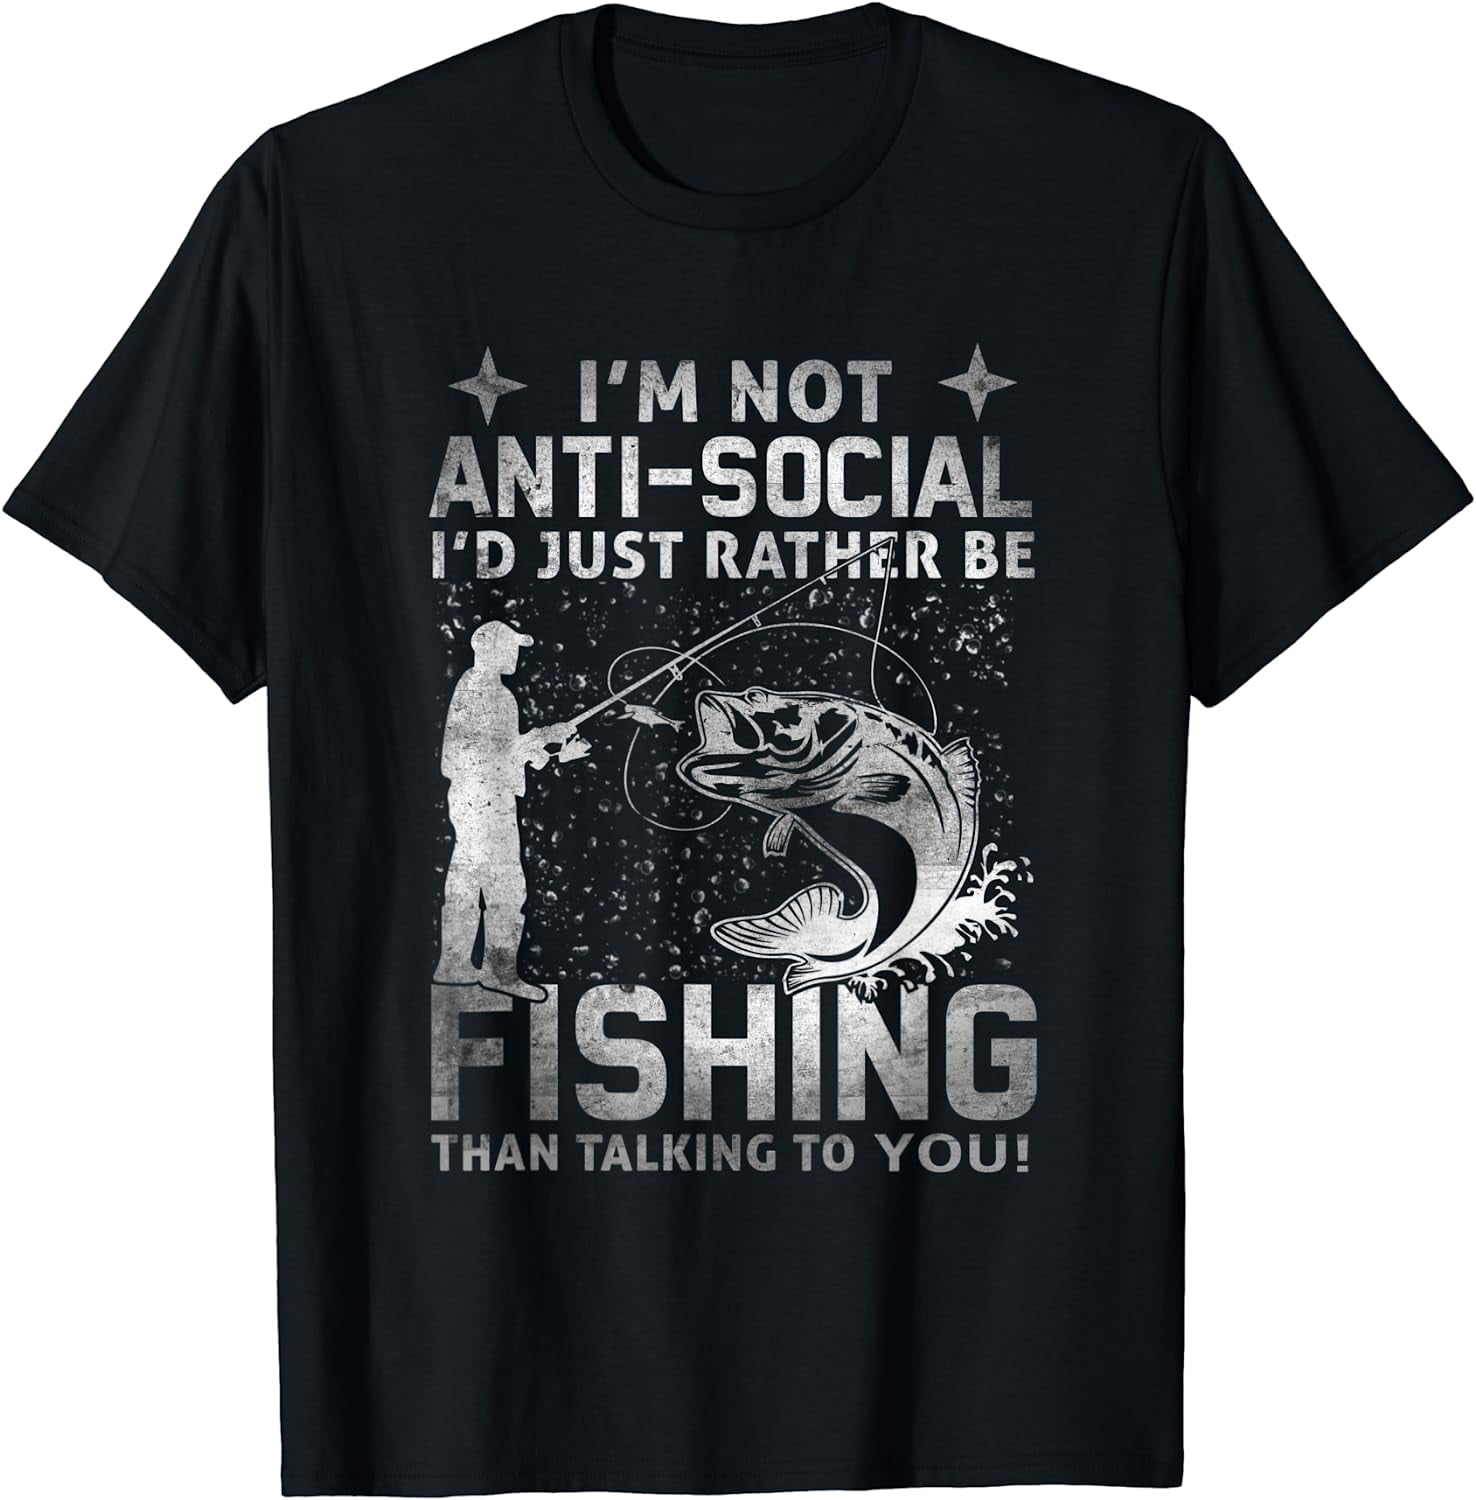 PAGLIO Really! - I'm Not Anti-Social, I'd Just Rather Be Fishing T-Shirt, adult Unisex, Size: 2XL, Black